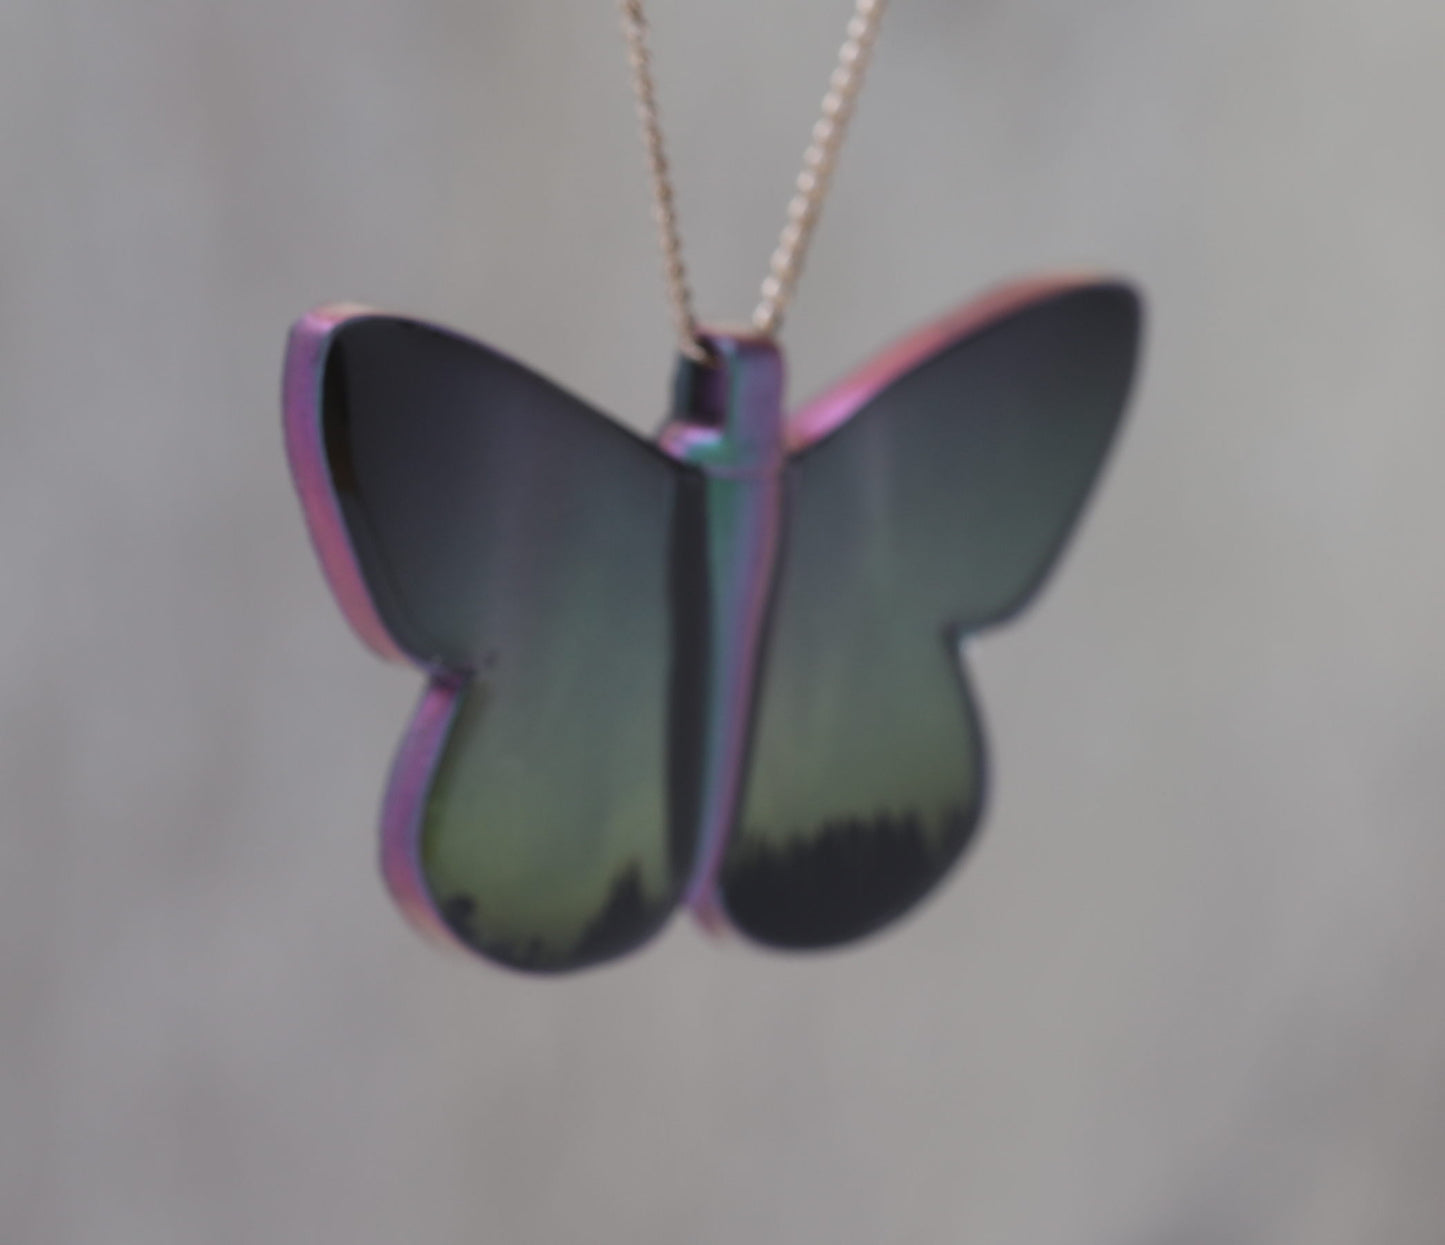 Northern Lights - Astronomy Butterfly Pendant made with a photo of the Aurora